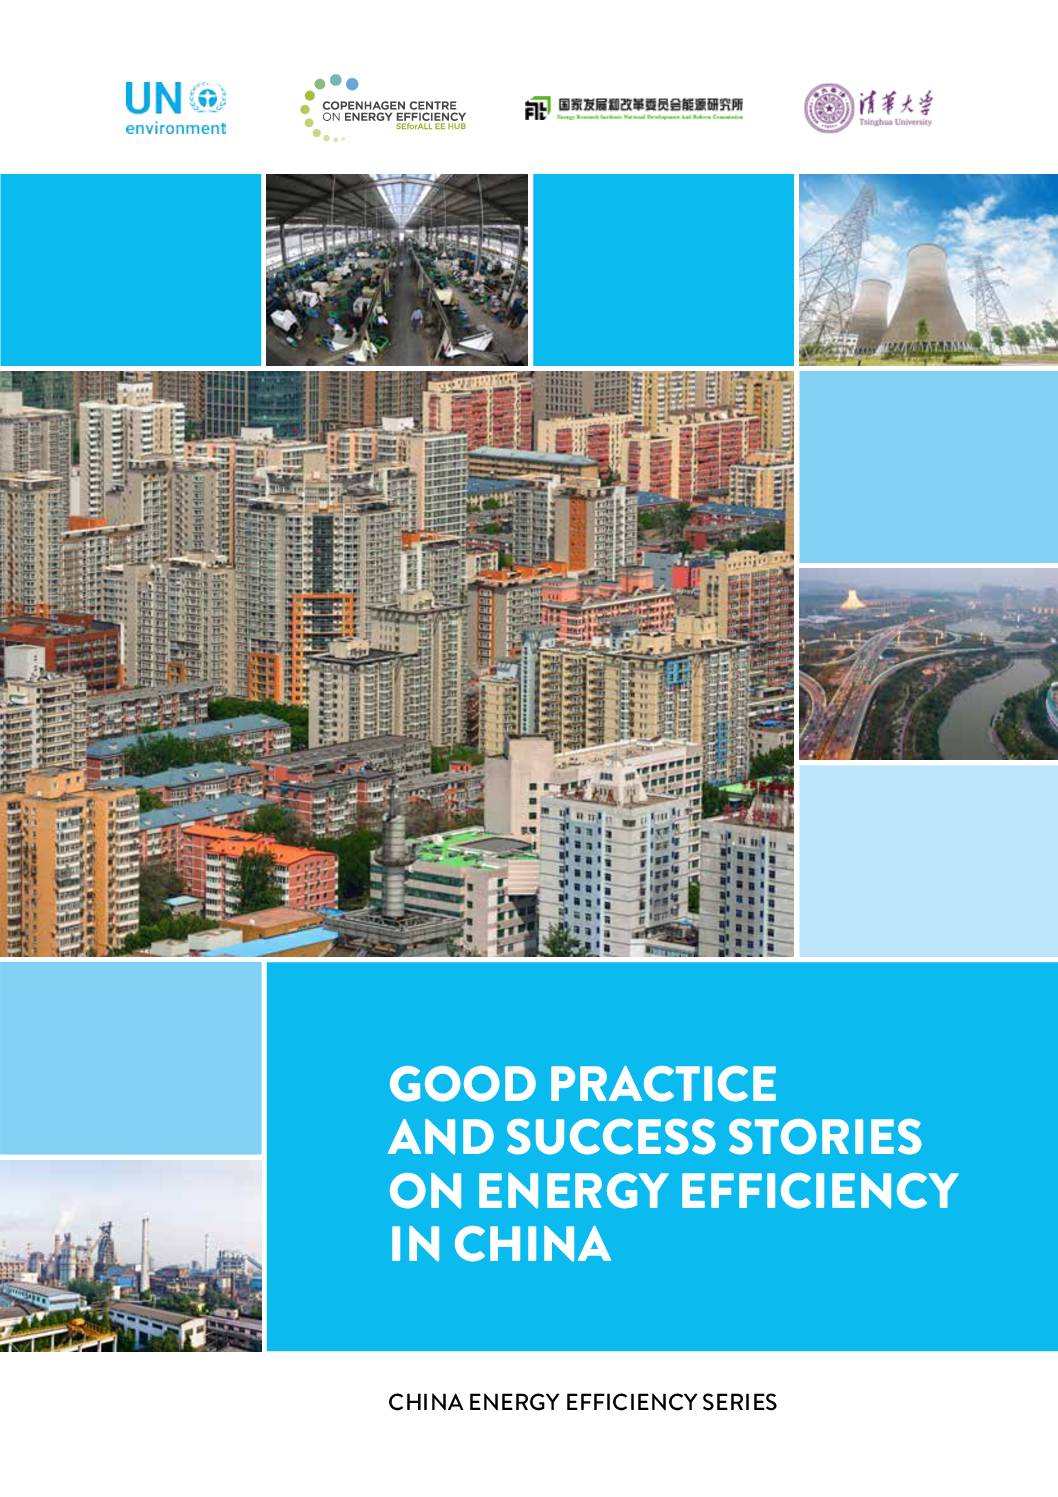 Good Practice and Success Stories on Energy Efficiency in China